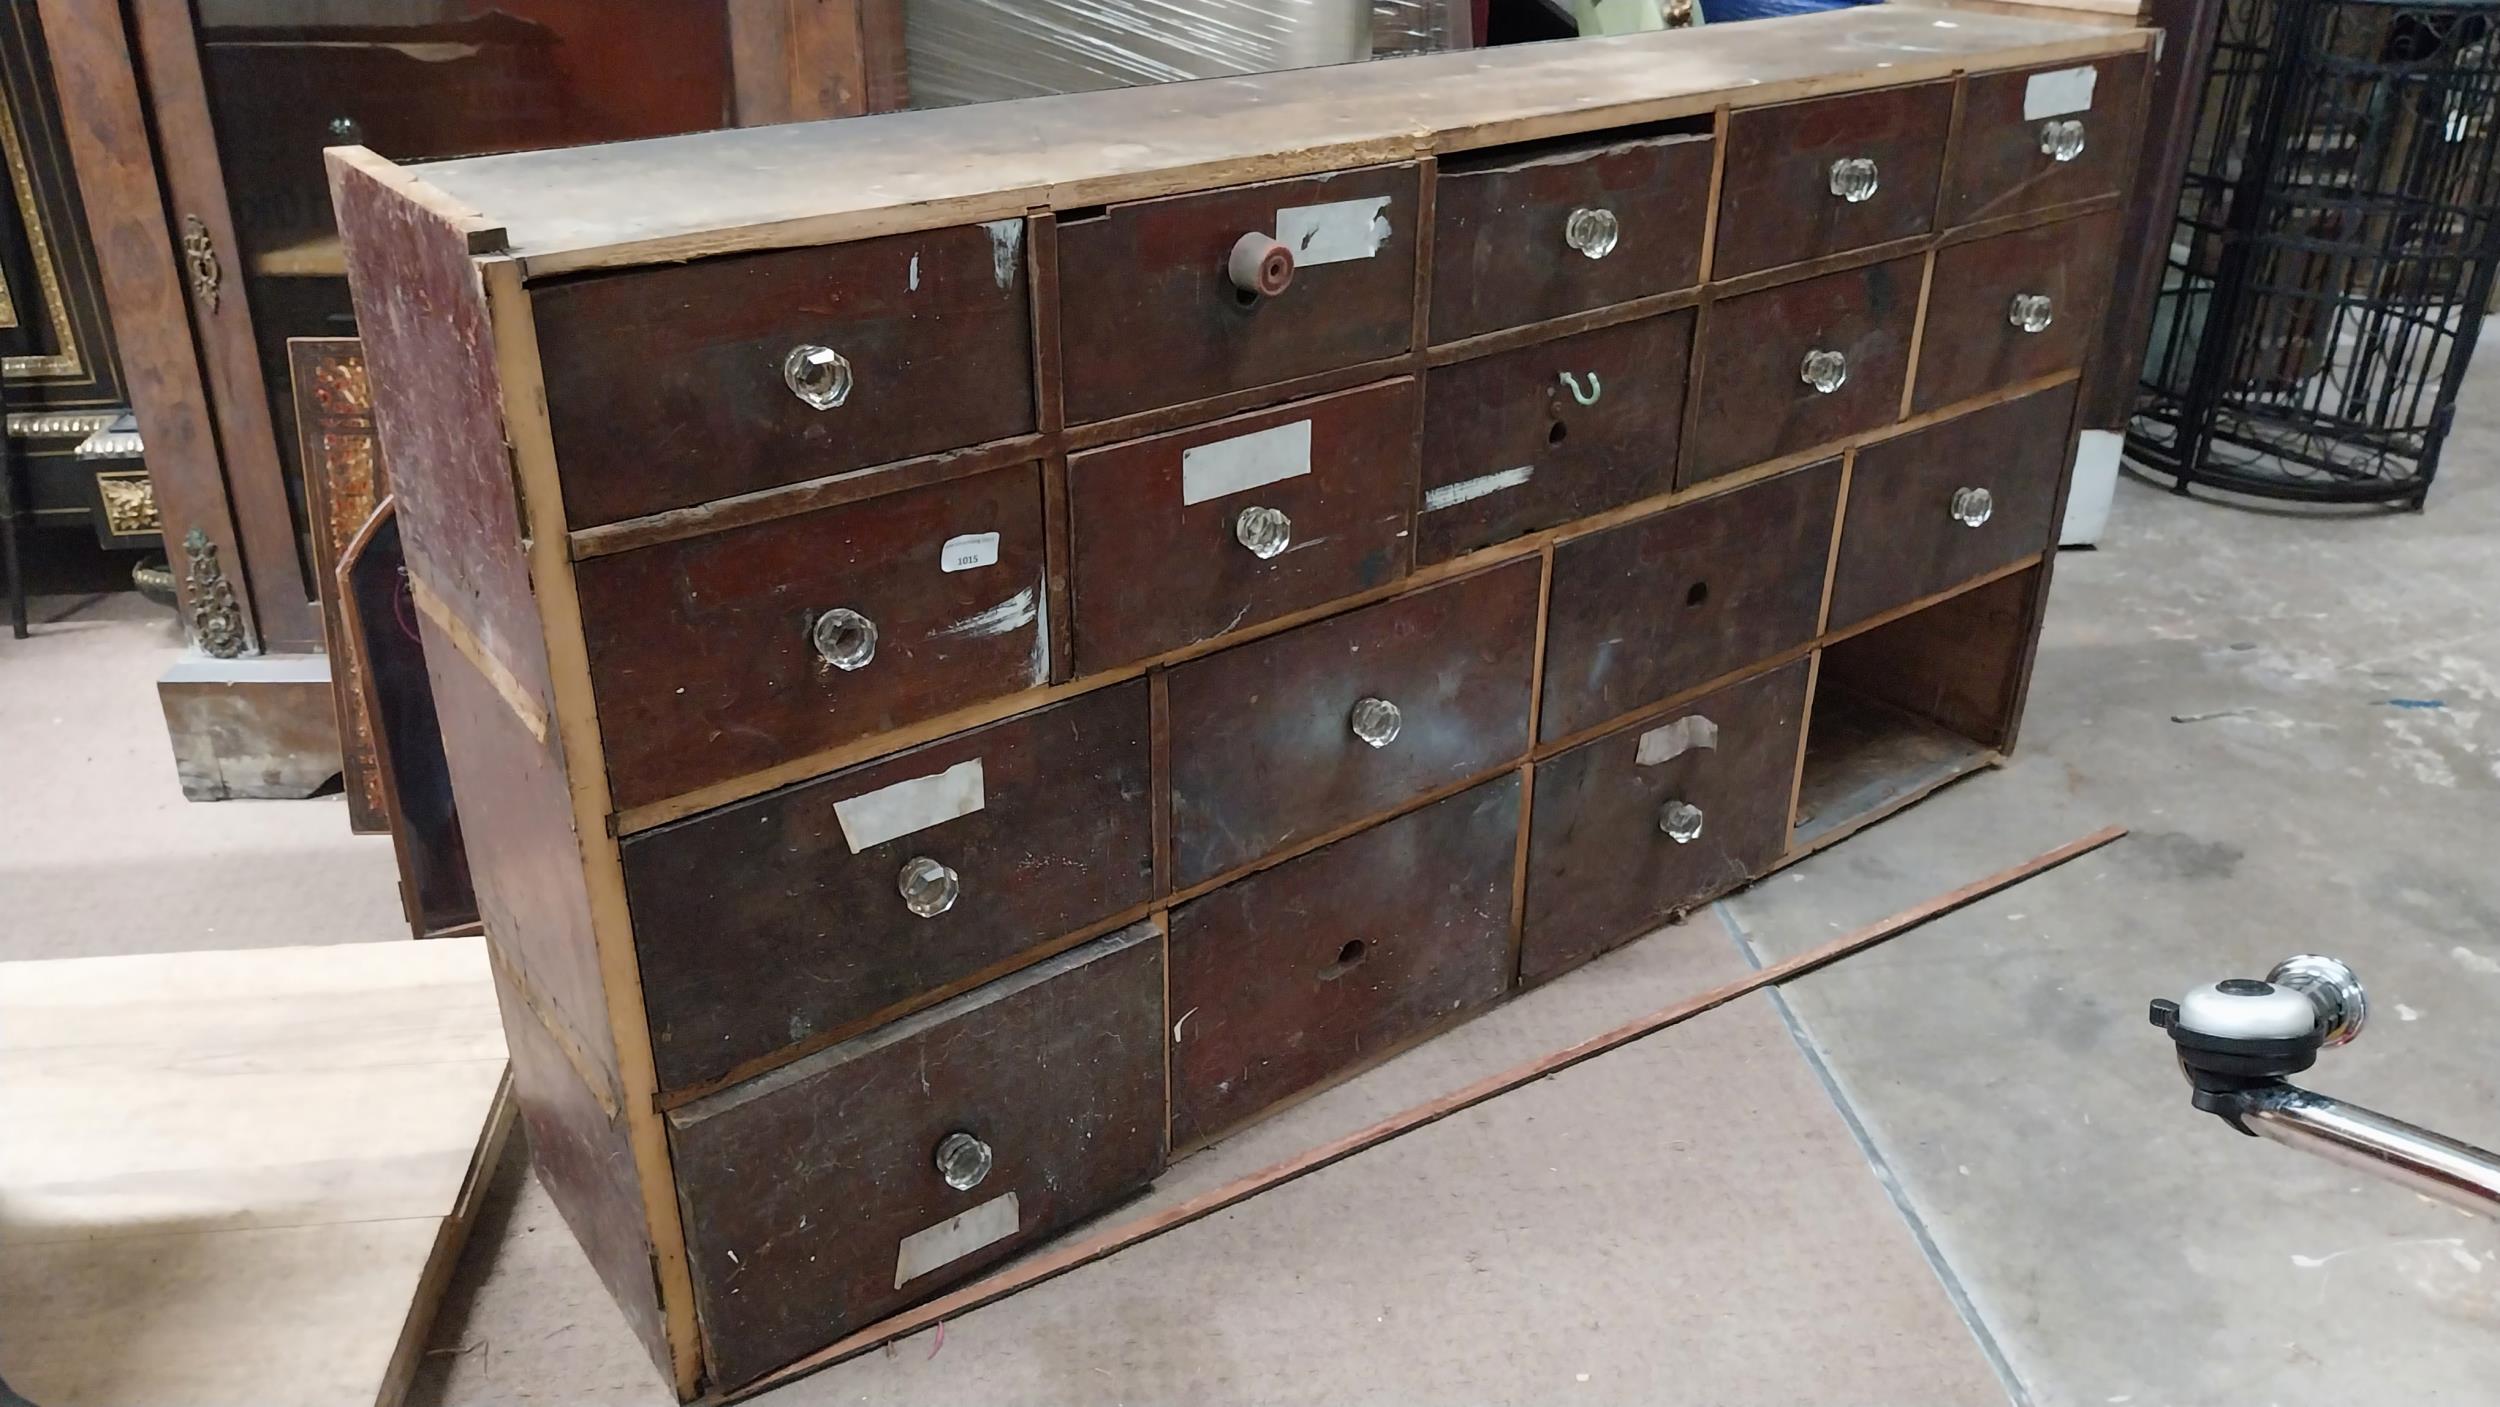 Early 20th C mahogany bank of eighteen drawers. (missing one drawer). {76 cm H x 152 cm W x 29 cm